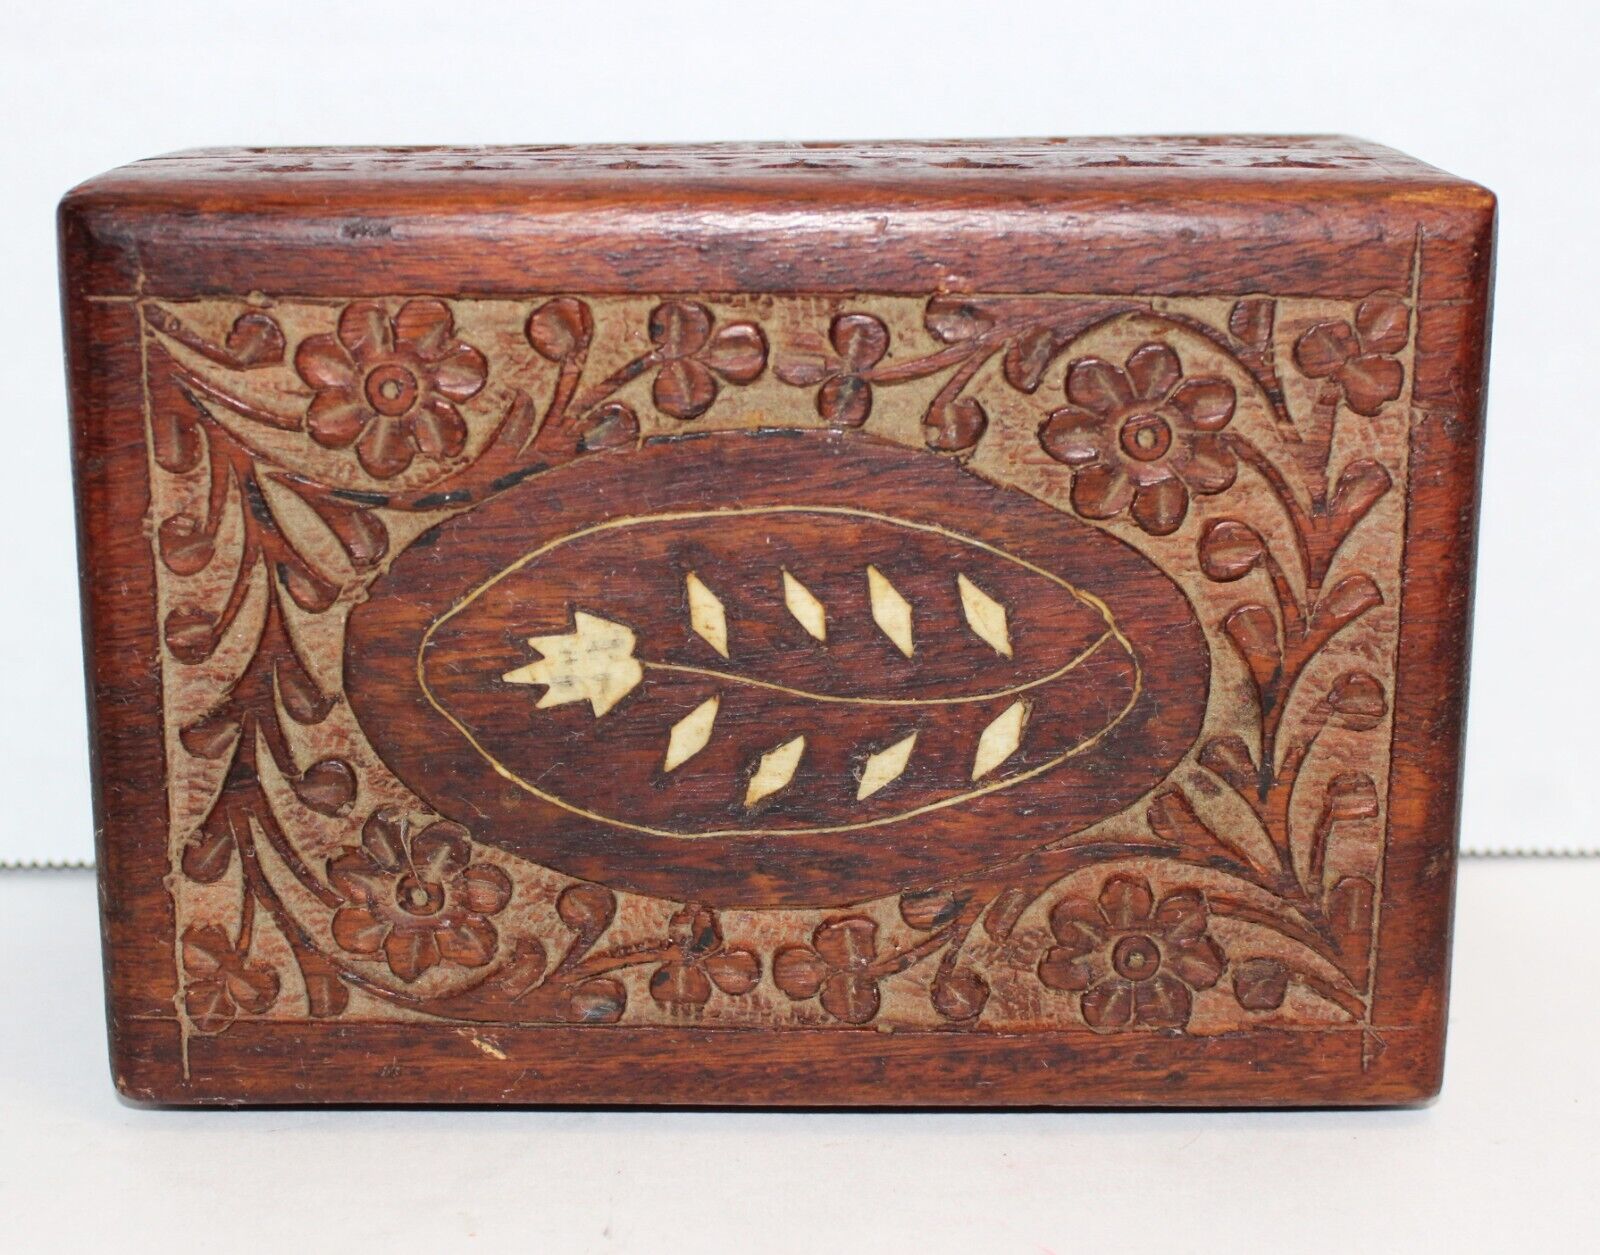 VTG Hand Carved Unique Small Wooden Stash Boxes 3 Different Designs Your Choice